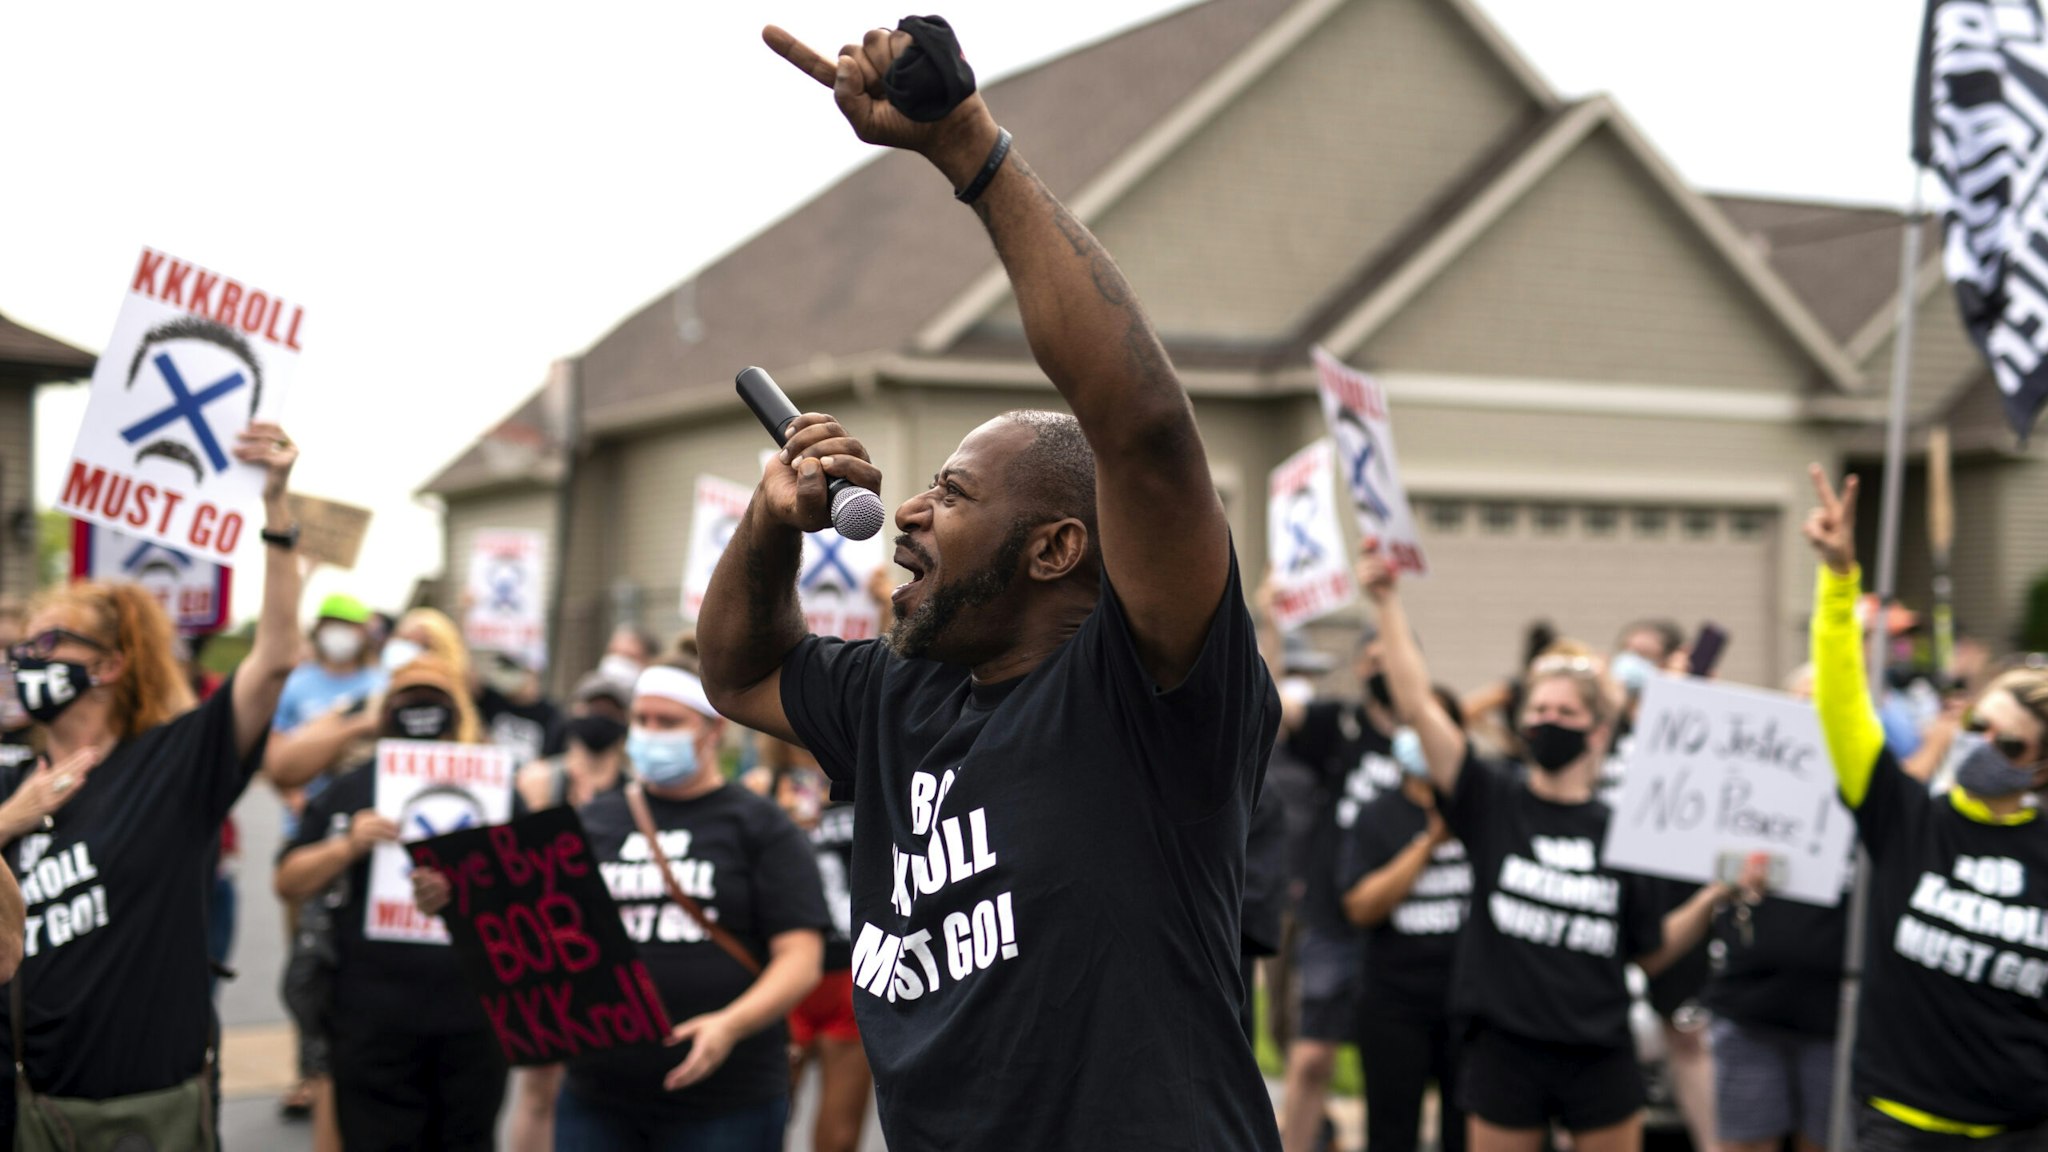 HUGO, MN - AUGUST 15: John Thompson, Minnesota Democratic candidate for district 67A, speaks during a protest near Minneapolis Police Union Chief Bob Kroll's house on August 15, 2020 in Hugo, Minnesota. Residents in Minneapolis have been calling for Kroll's resignation since George Floyd was killed by Minneapolis Police on May 25.